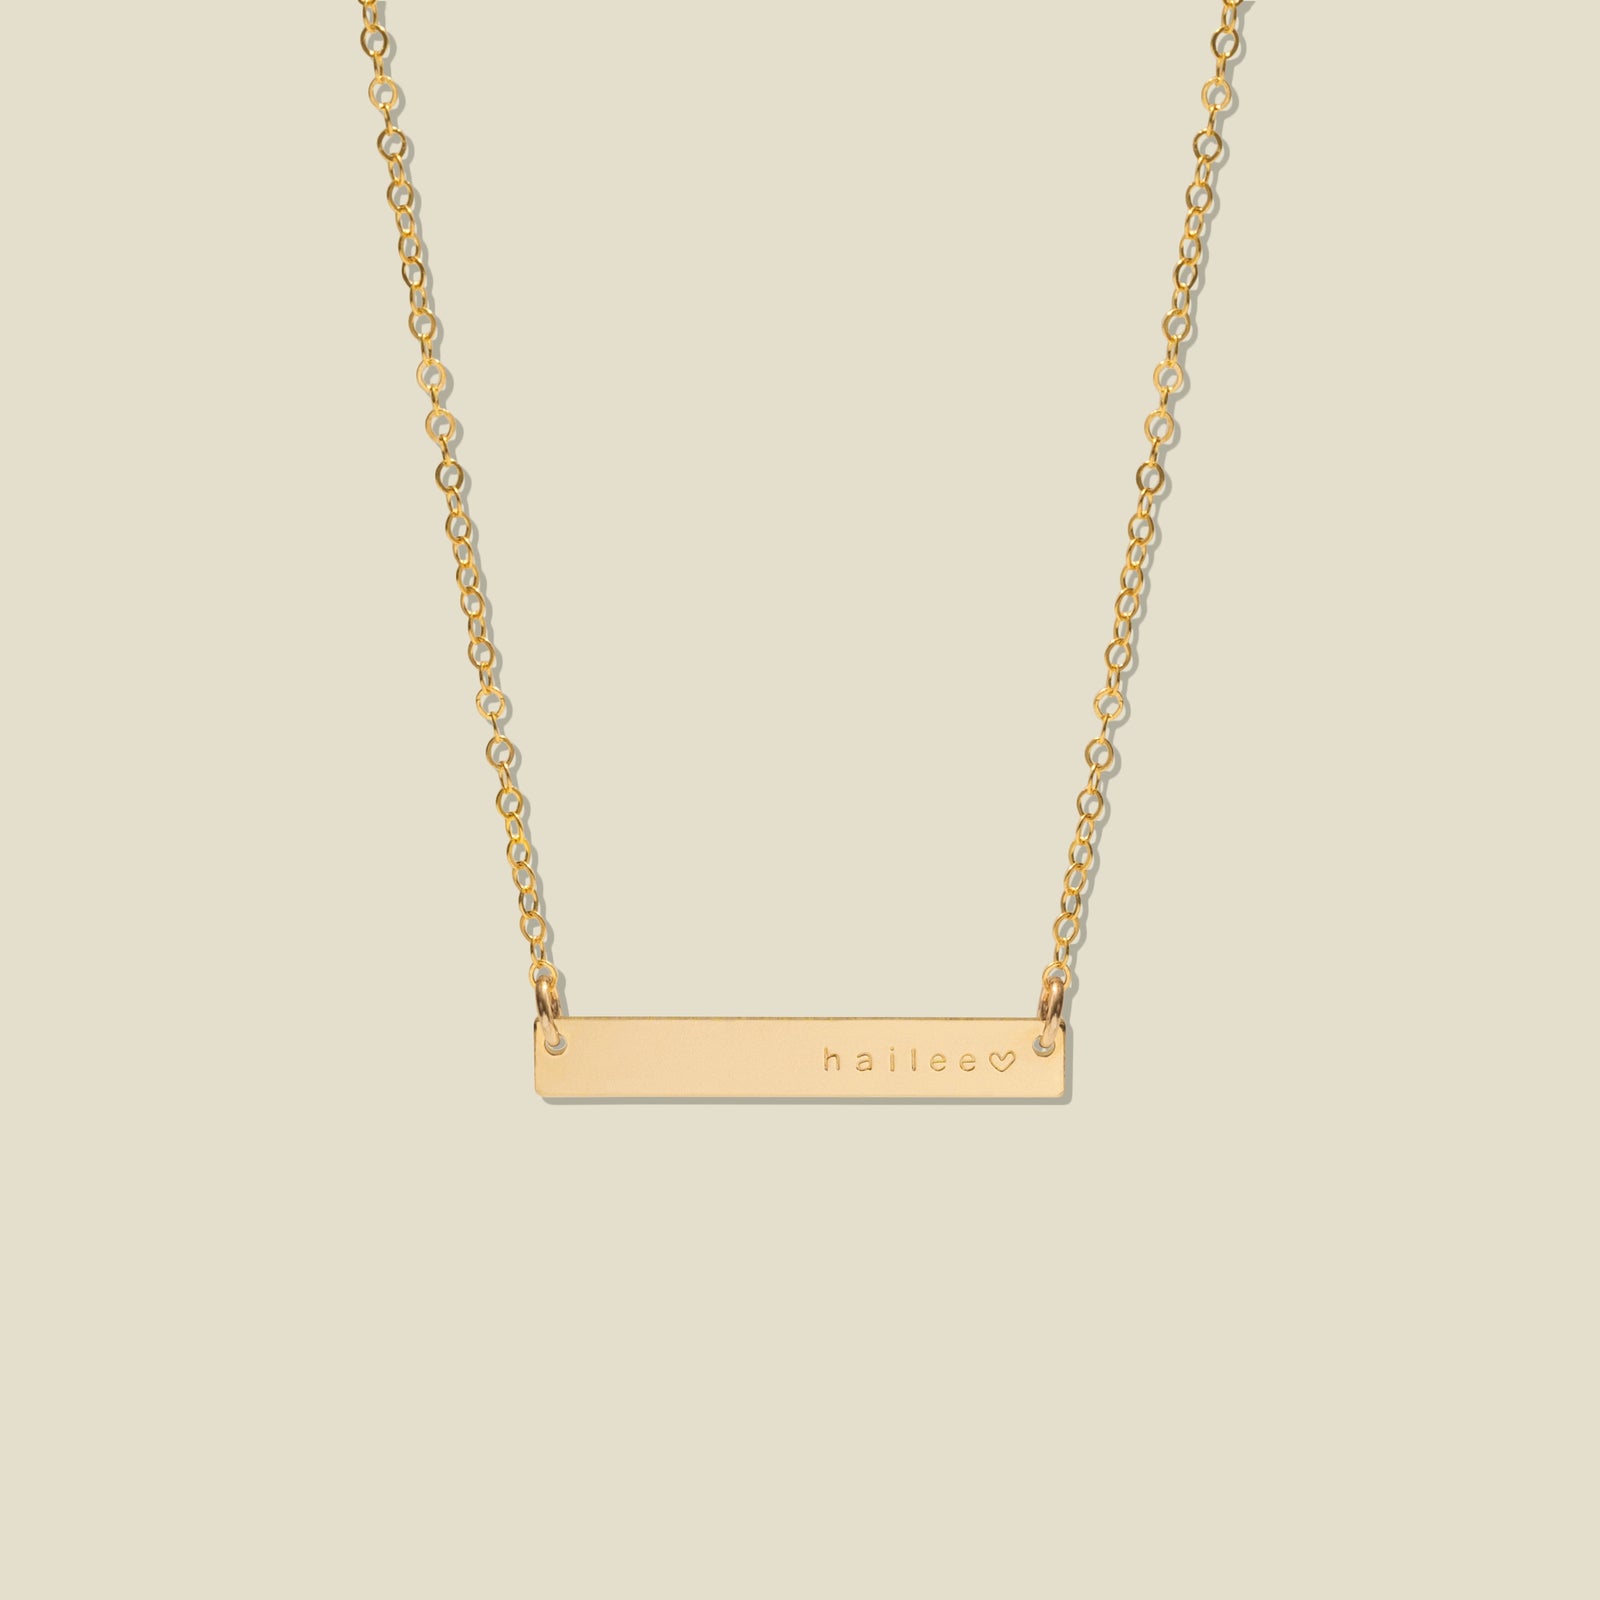 Horizontal Bar Necklace Gold Filled / 17"-19" Necklace